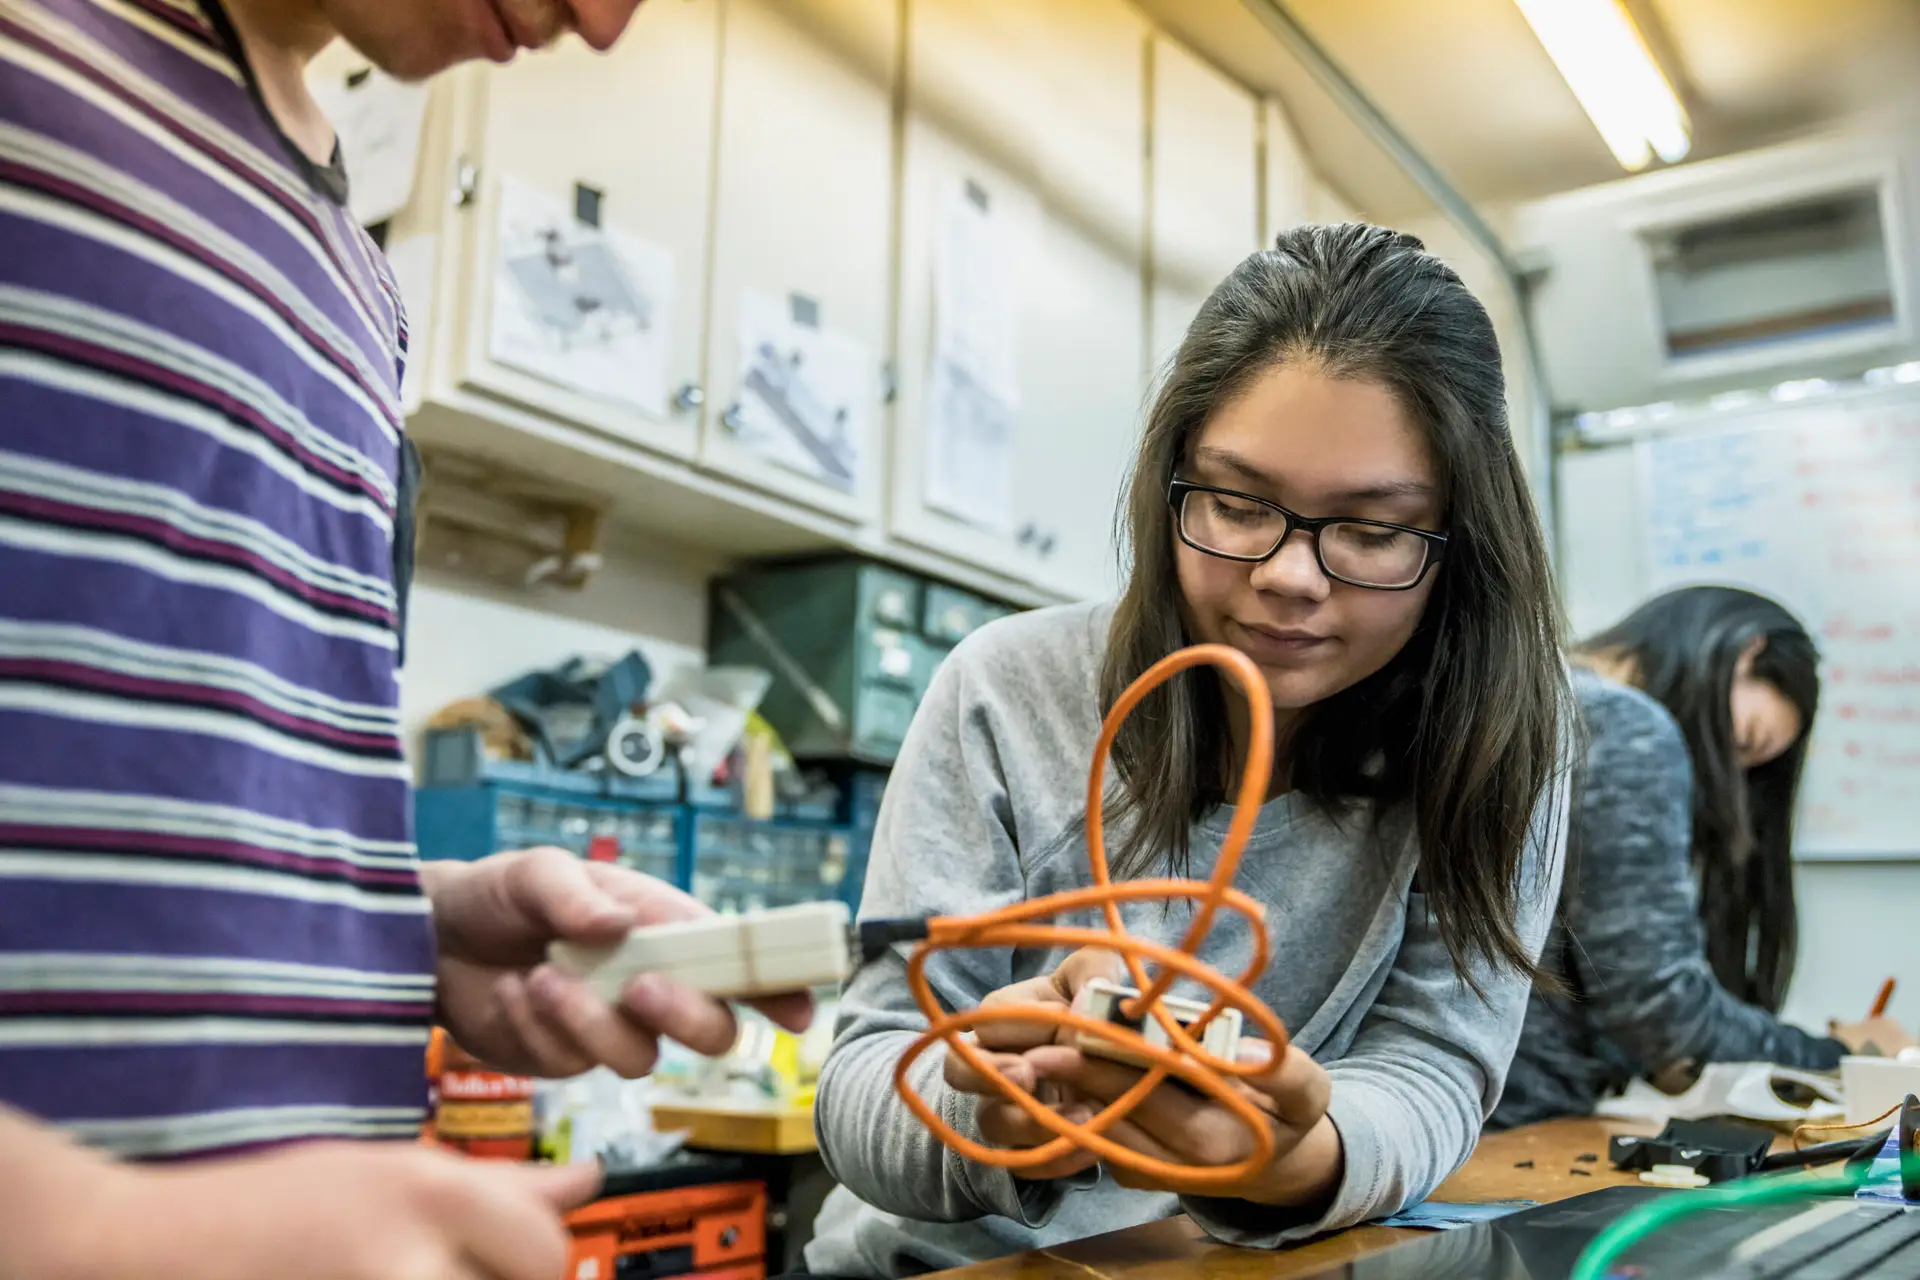 A hispanic female middle school student connects wiring on a robot during a school project